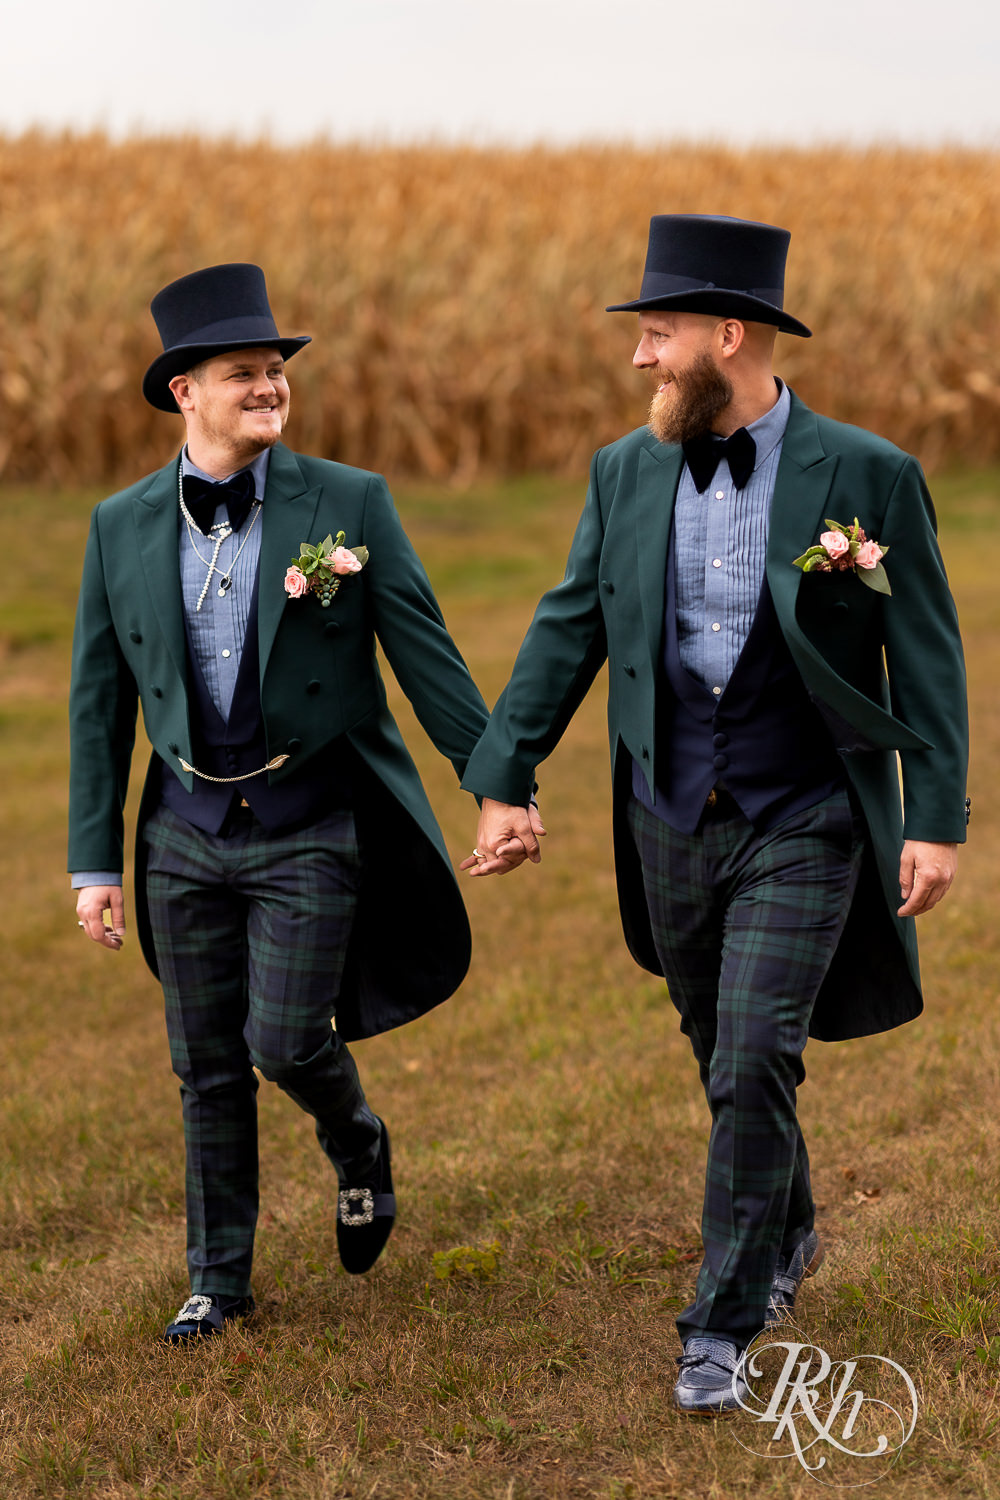 Grooms walking and holding hands in field on their wedding day.